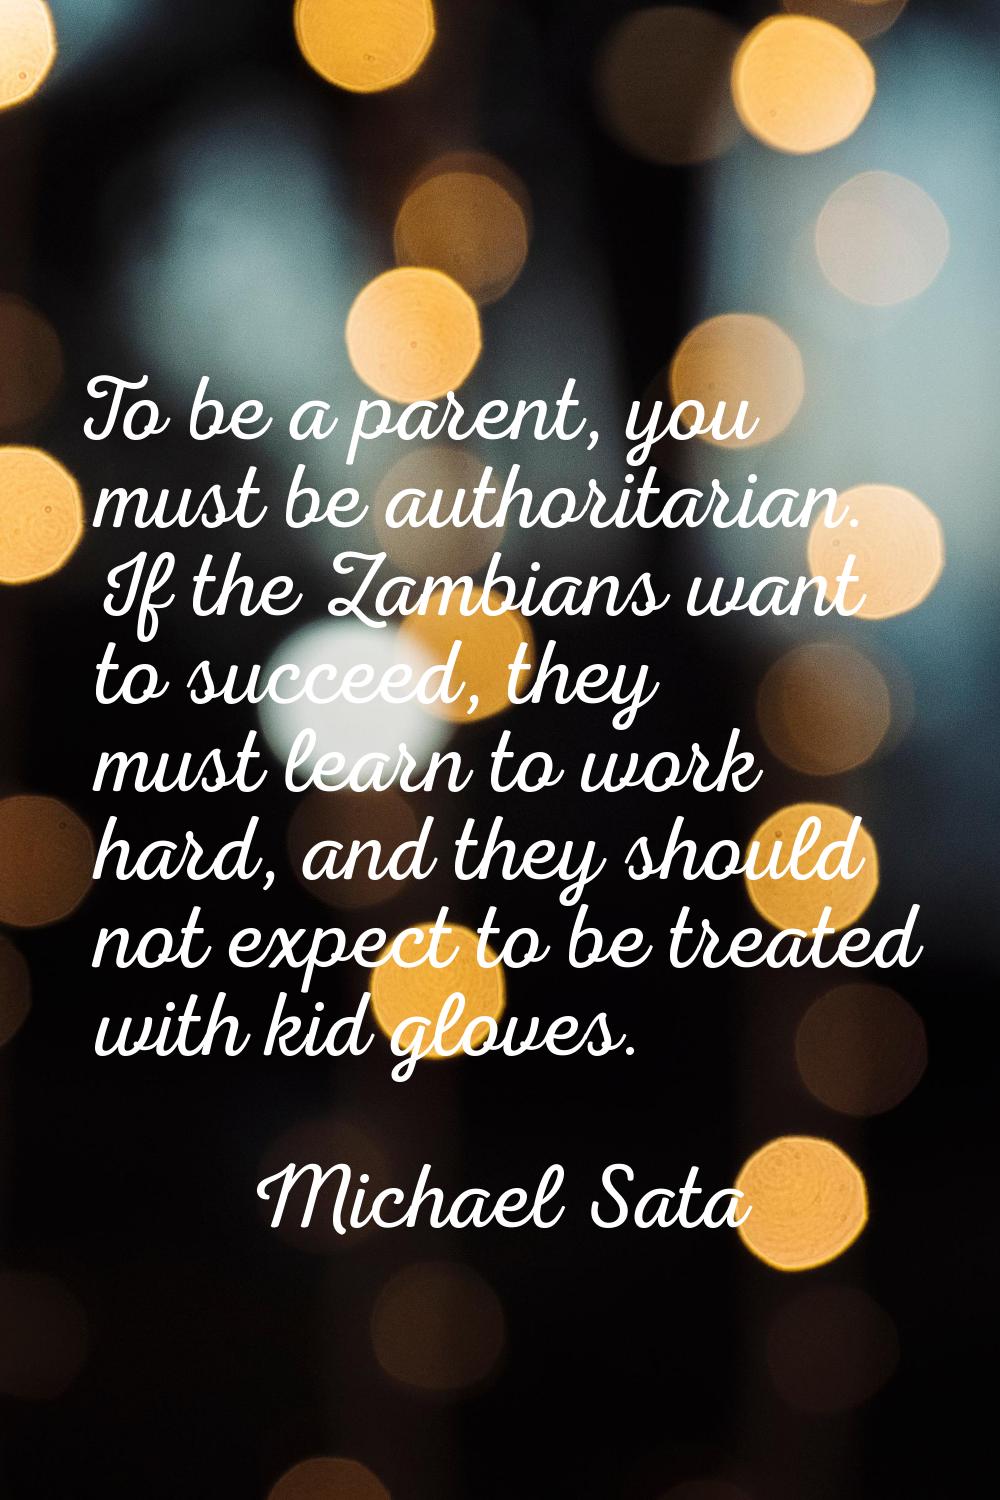 To be a parent, you must be authoritarian. If the Zambians want to succeed, they must learn to work